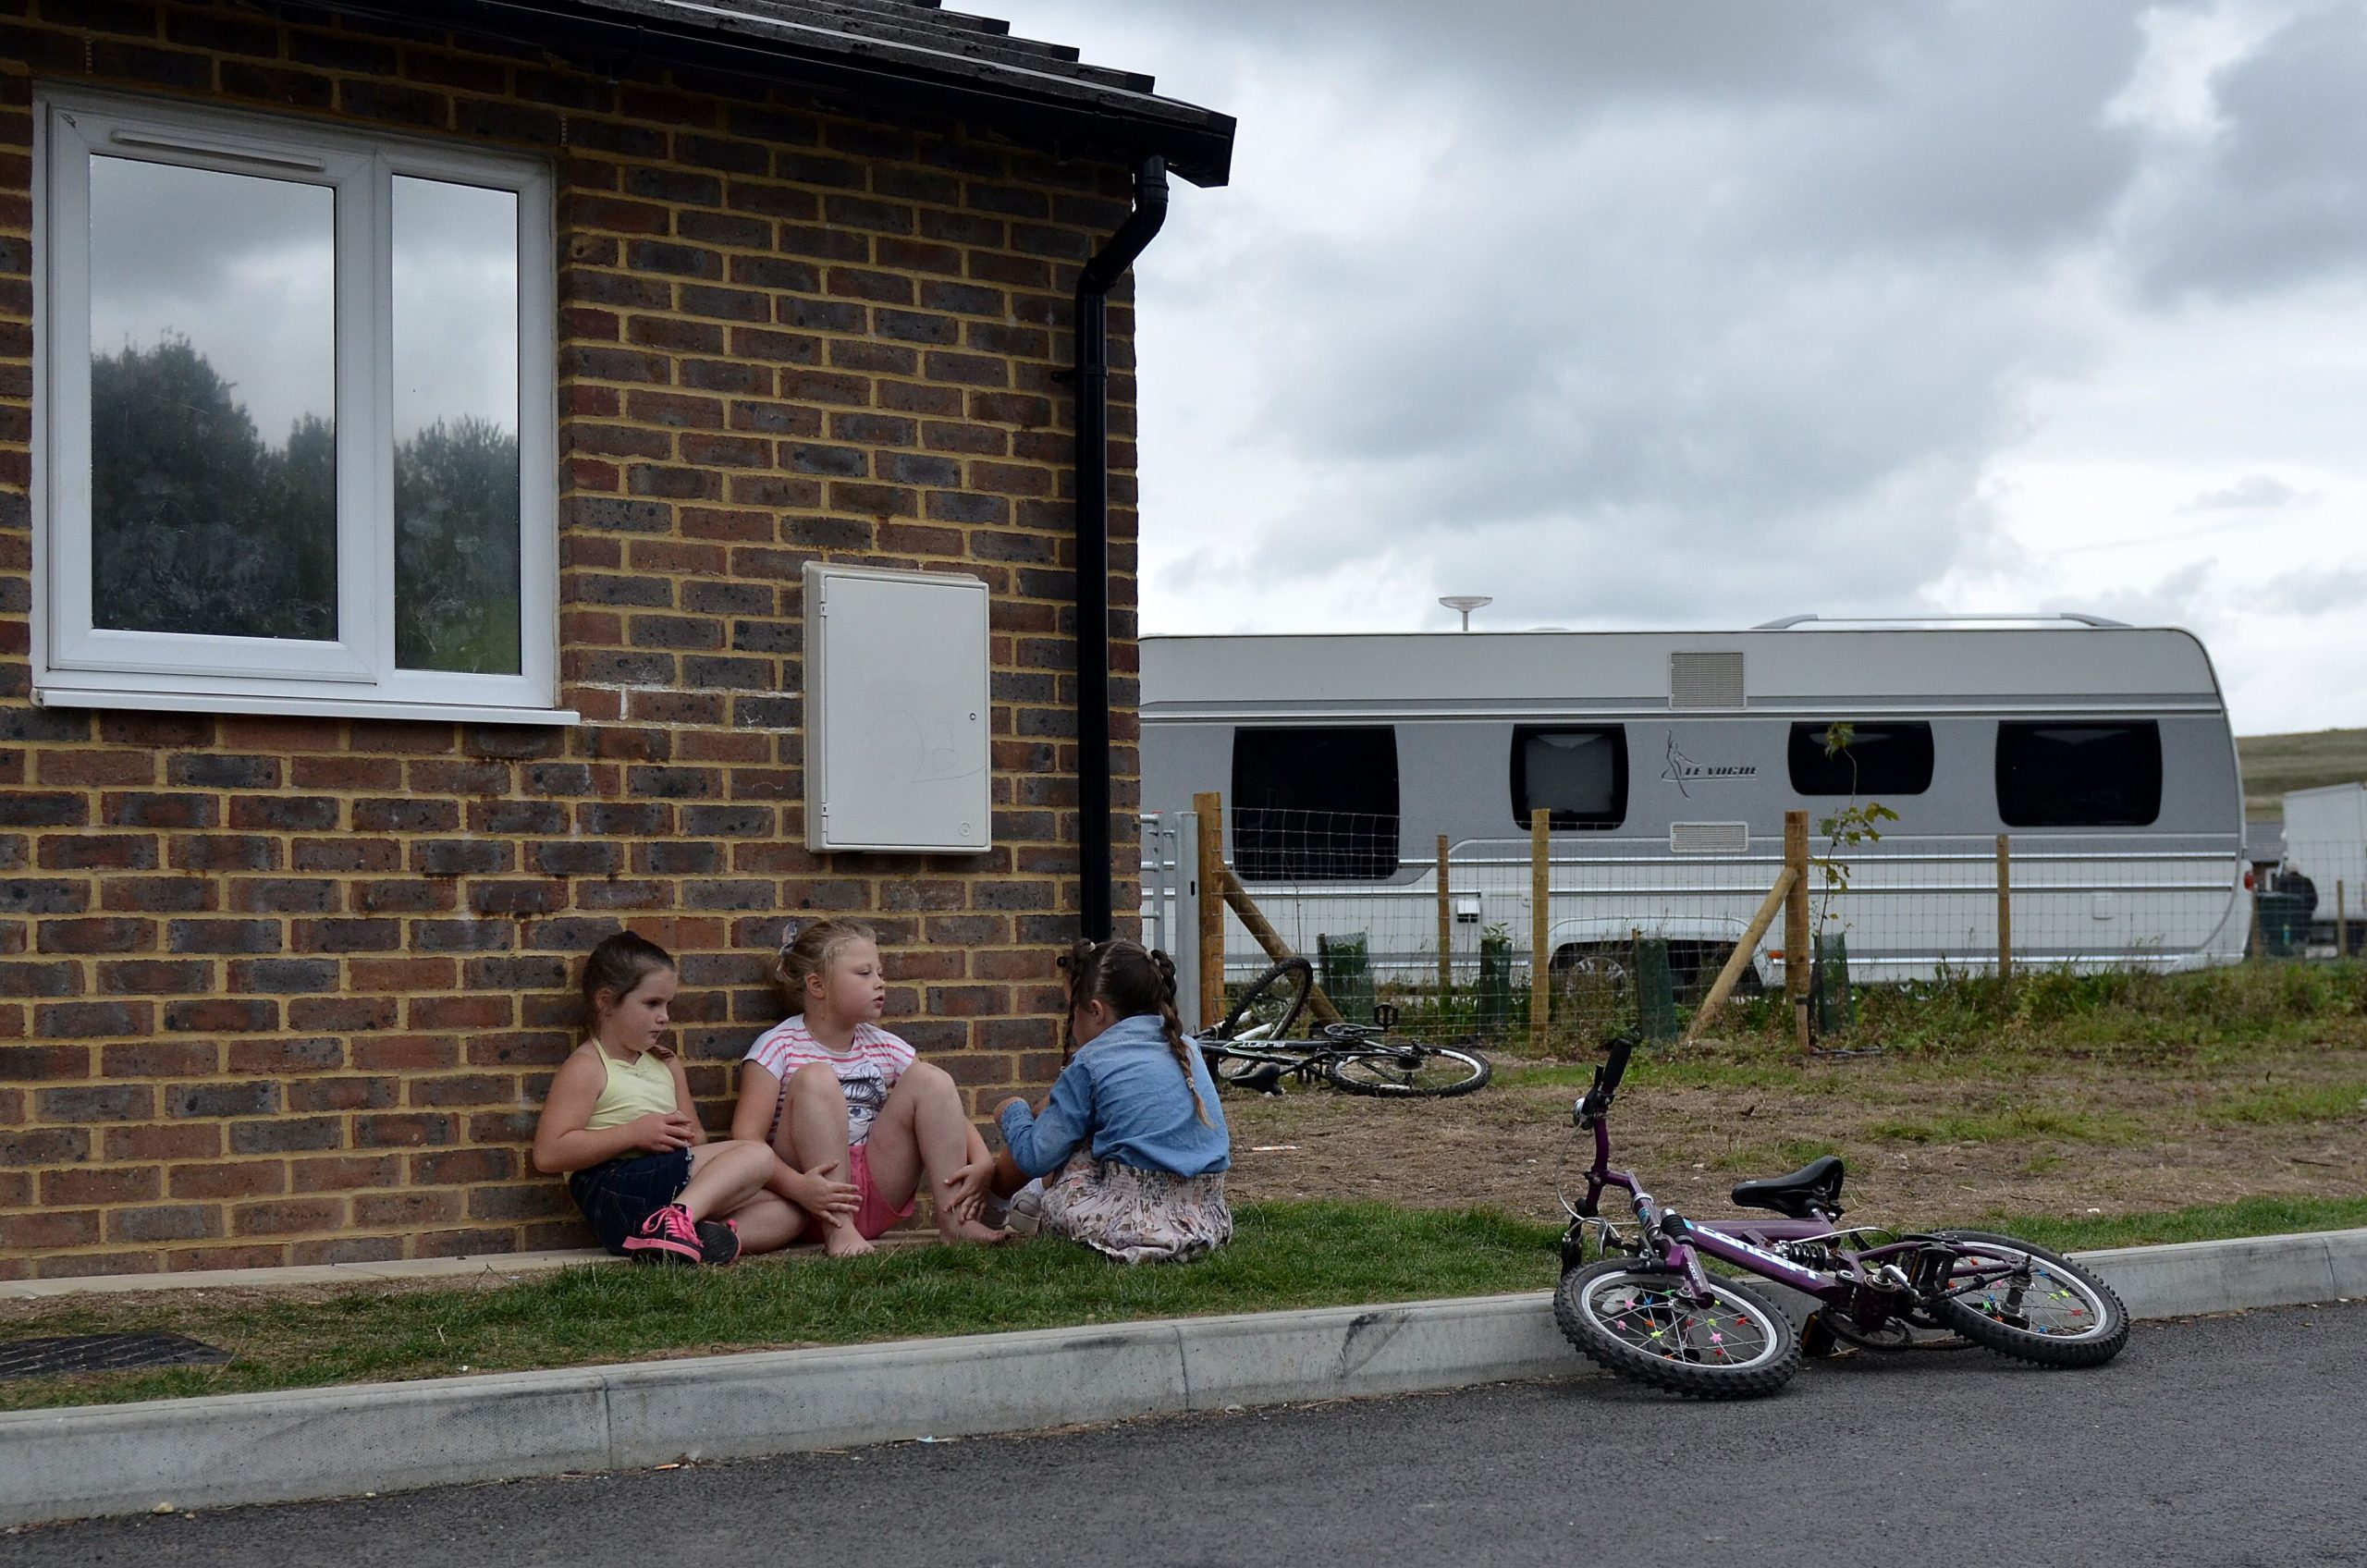 A group of three girls are sat on a patch of grass in front of a brick wall with a window. There is a bike laid down on the kerb in front of them and another rested against a small wooden fence to the right, behind them. A caravan can also be seen to the right of the children in the background.